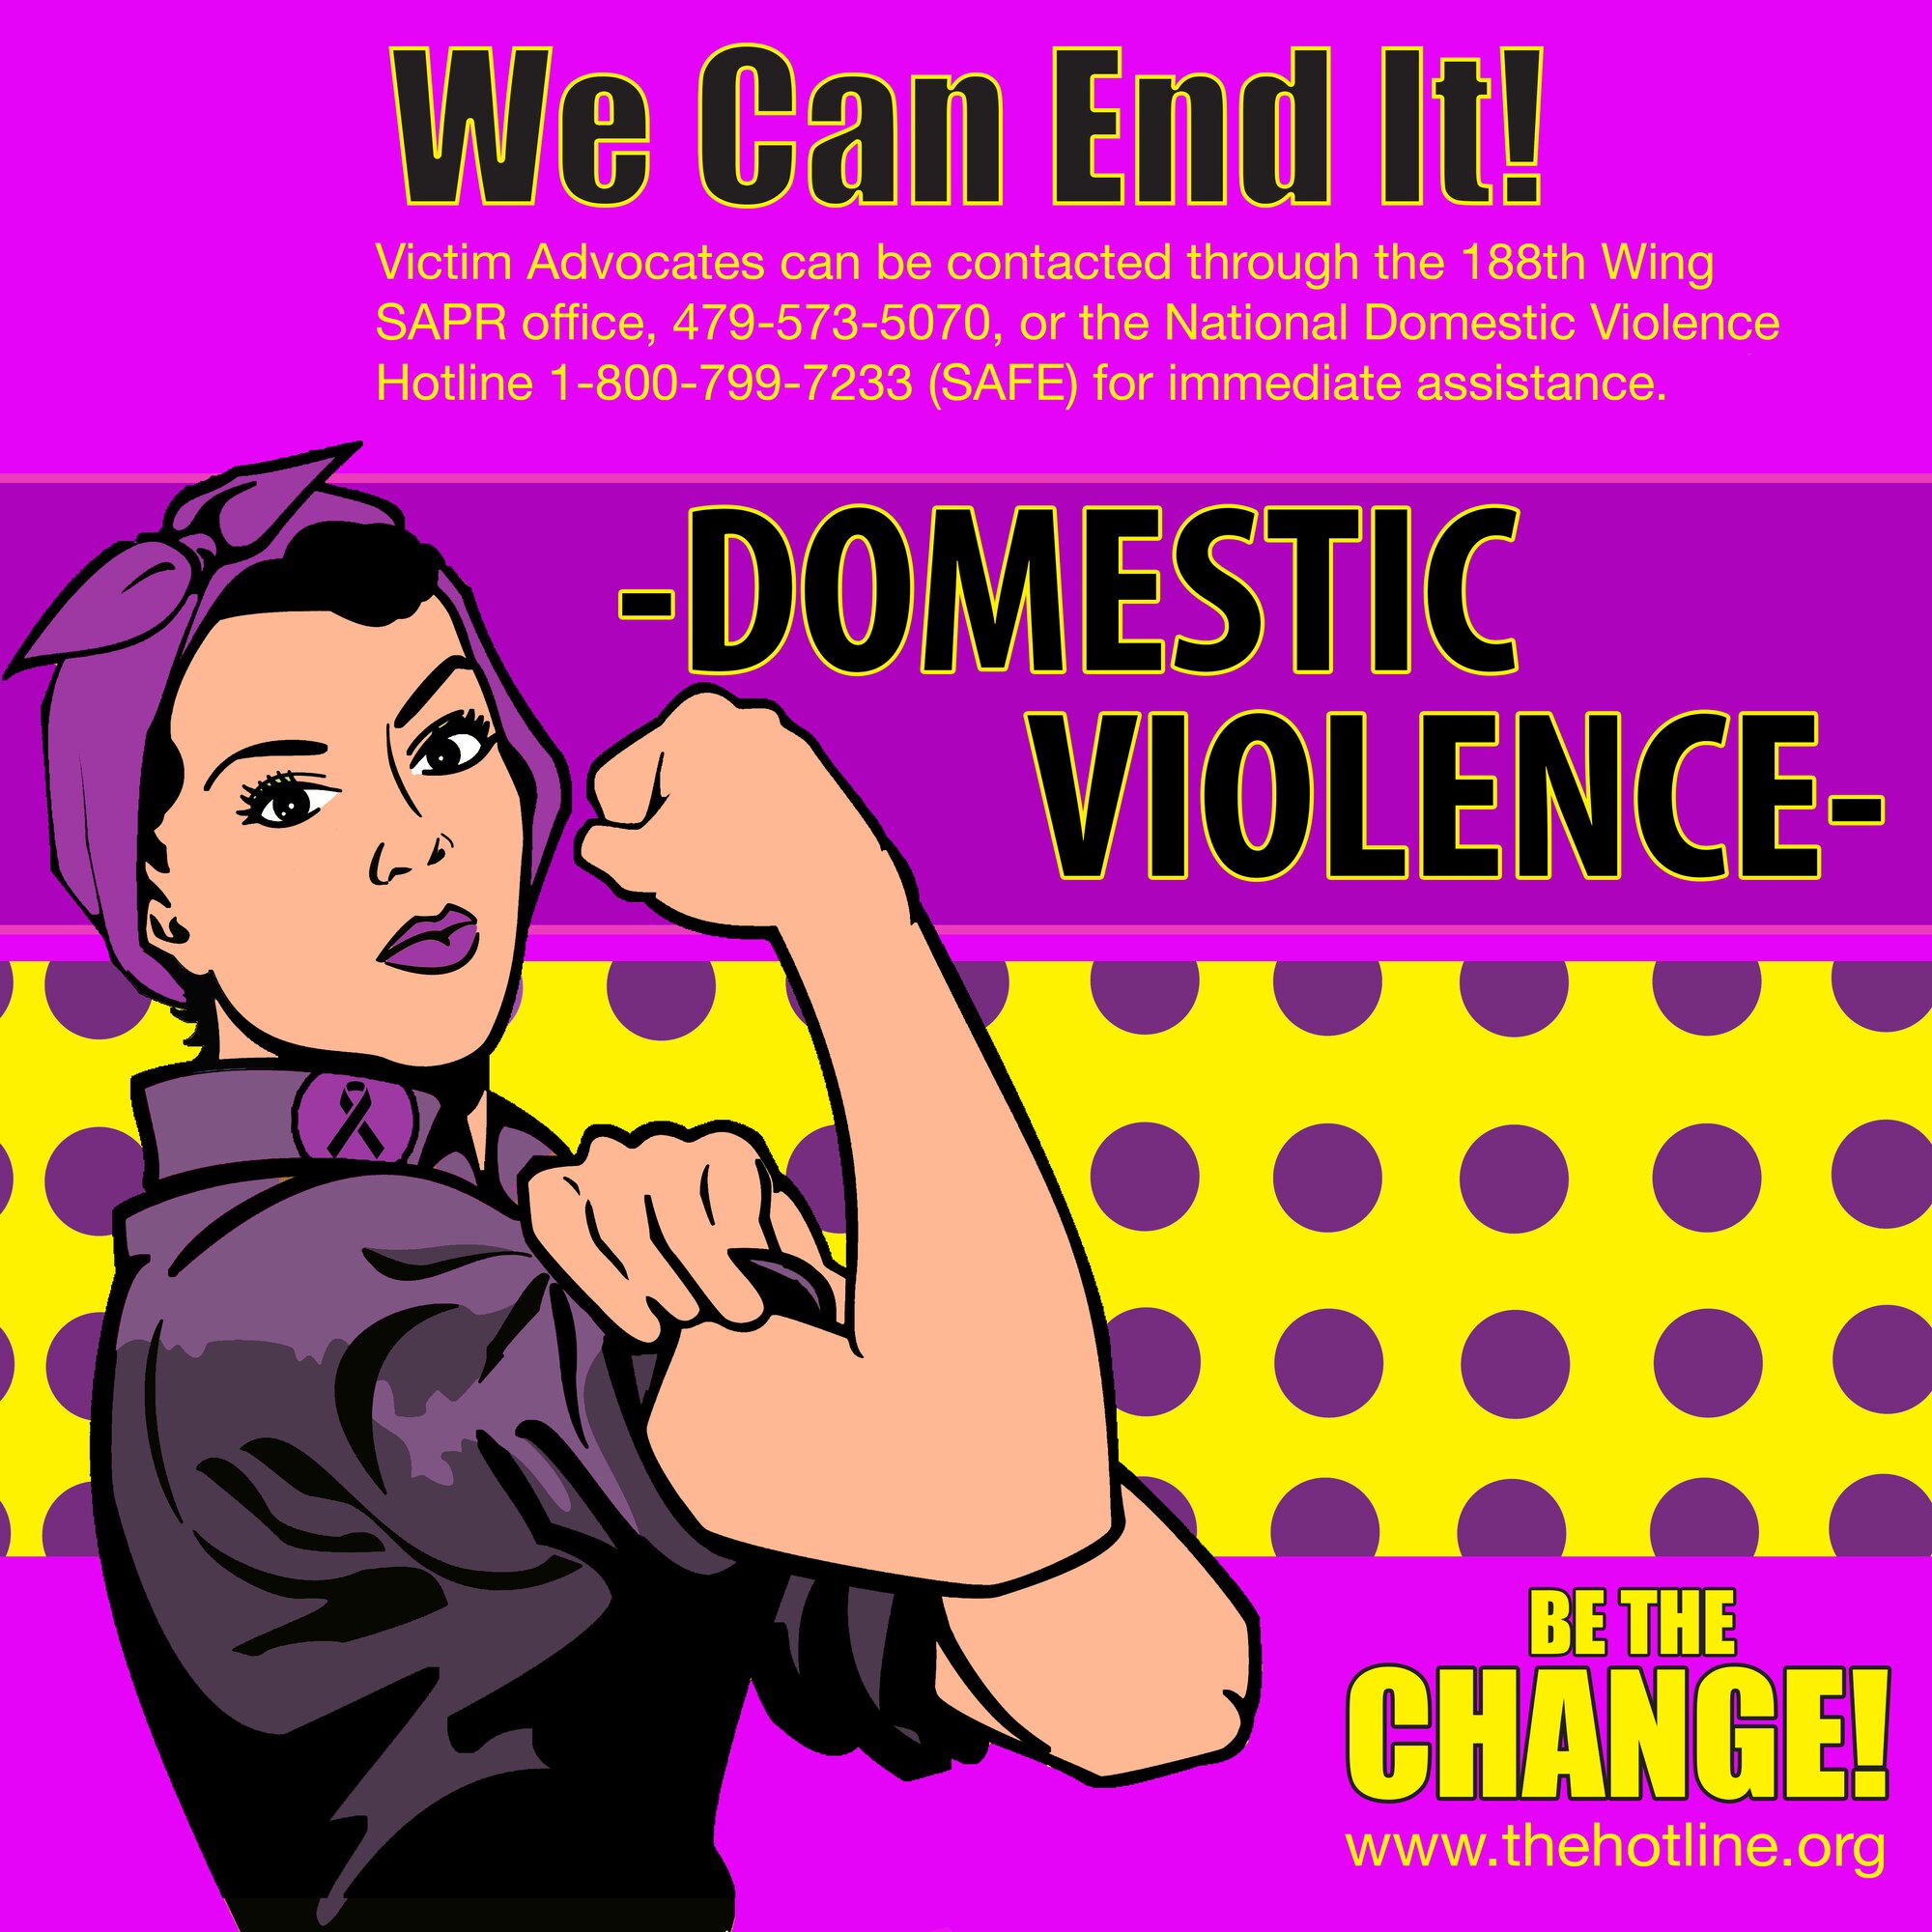 October is nationally recognized as Domestic Violence Awareness Month. Each year, between 960,000 and 3,000,000 cases of domestic abuse are filed. On top of the reported cases, there are many other incidents that go unreported. In the Unites States alone, it is estimated that 1 in 4 women, and 1 in 7 men are victims of domestic abuse every year. There are a variety of resources you can contact to report an incident. The national domestic violence hotline is 1-800-799-7233 (SAFE) and their website is www.thehotline.org. There are also resources through the wing’s Director of Psychological Health, Chaplain’s office, or SAPR office. Together, we can be the change.